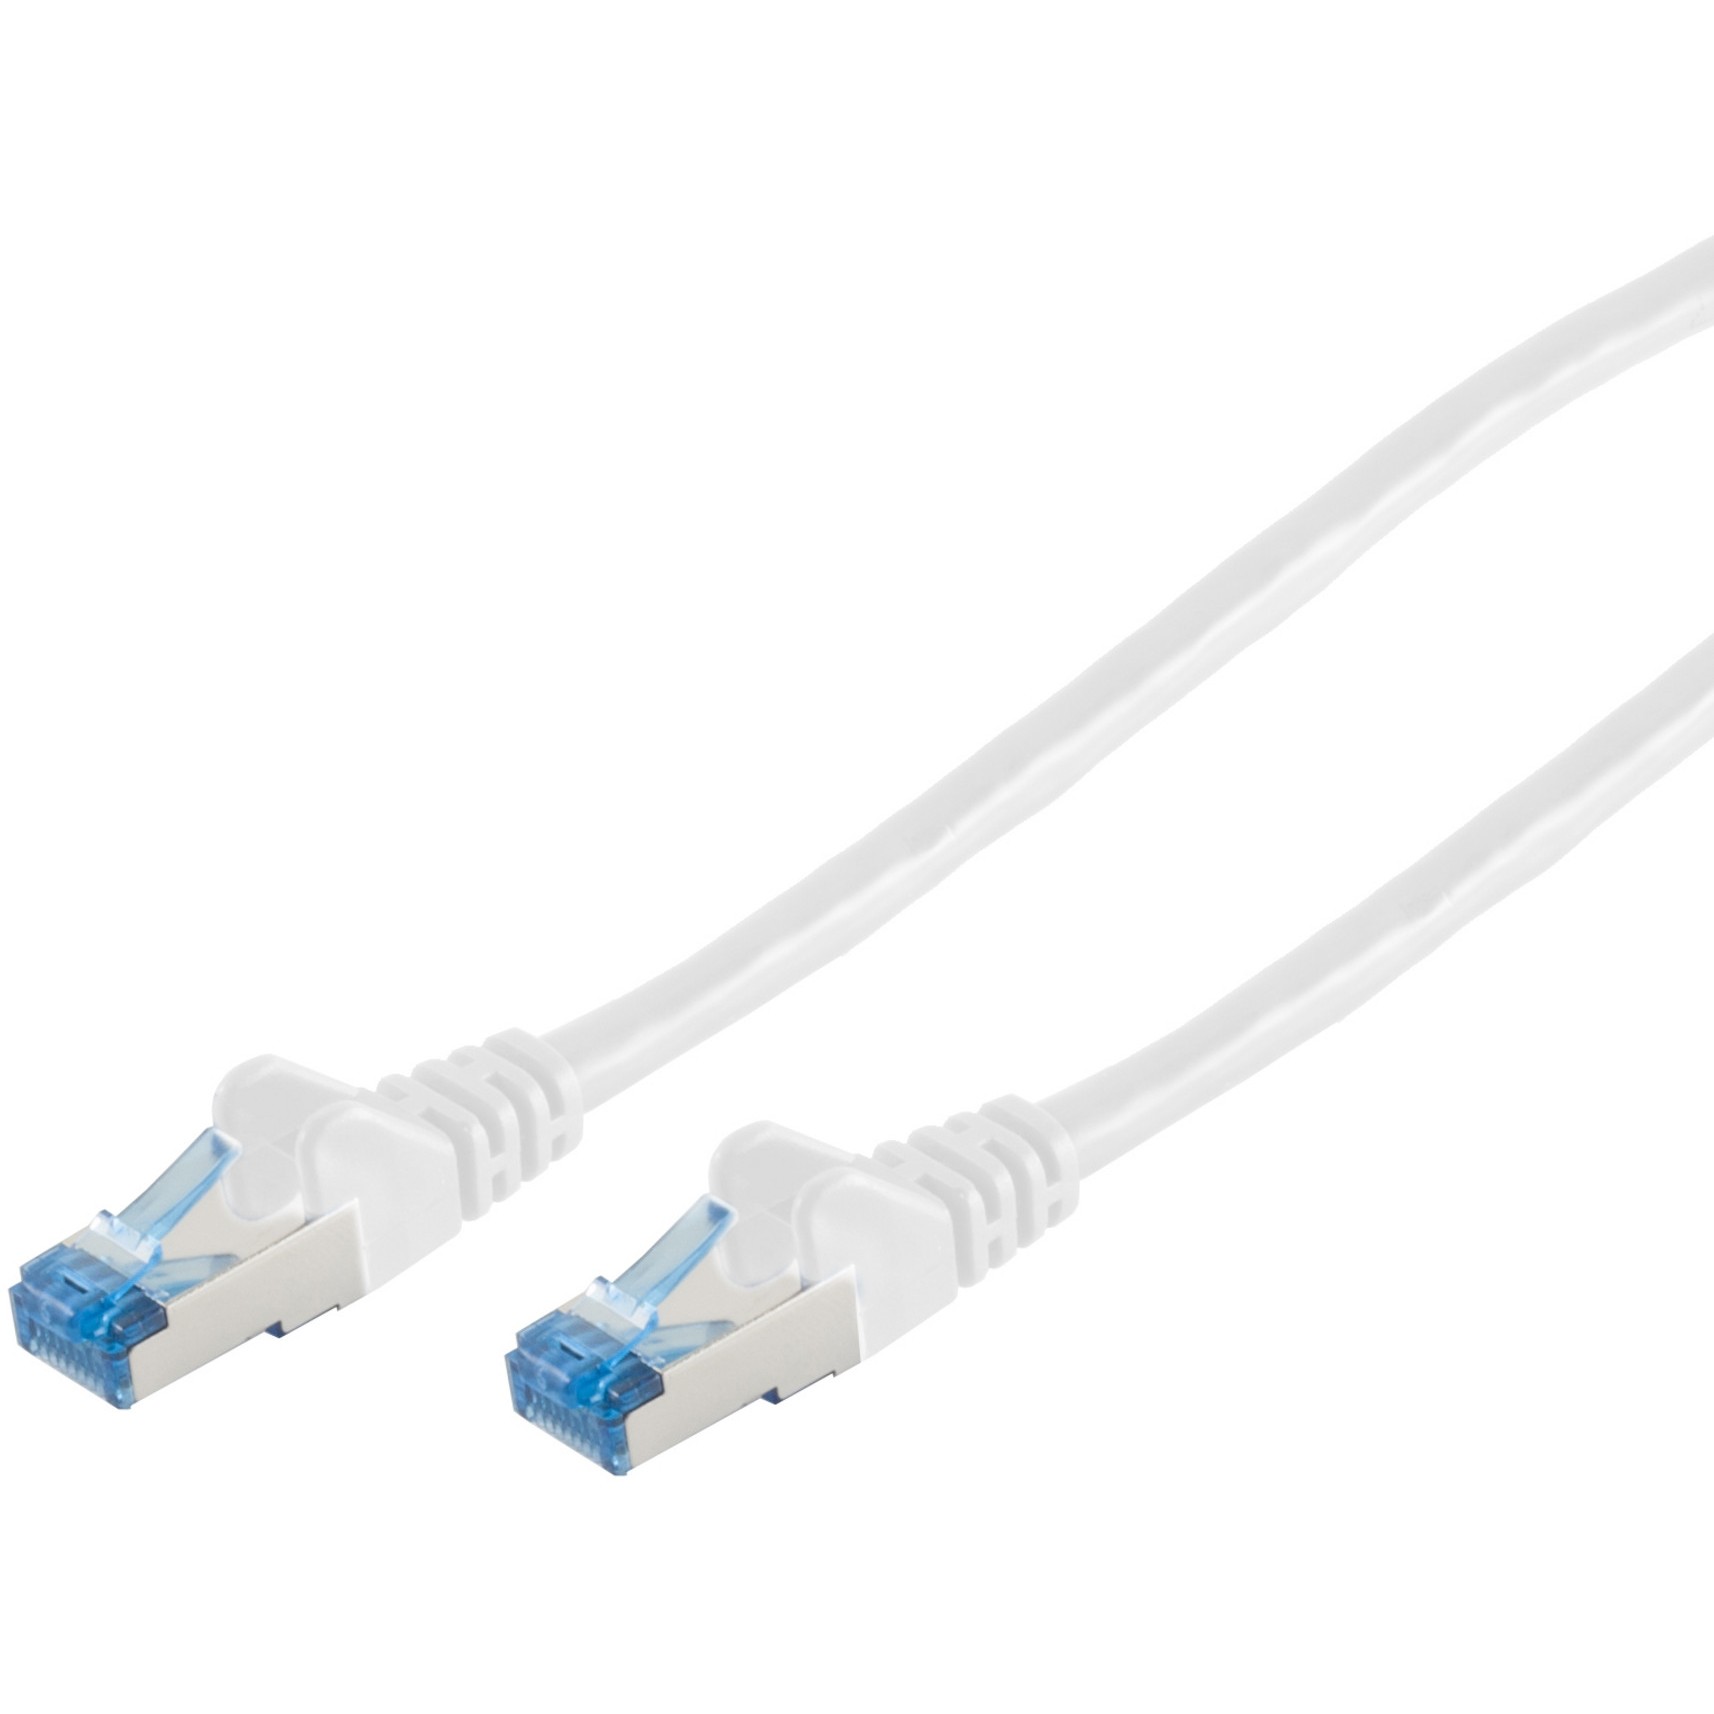 S-Conn 75725-W networking cable